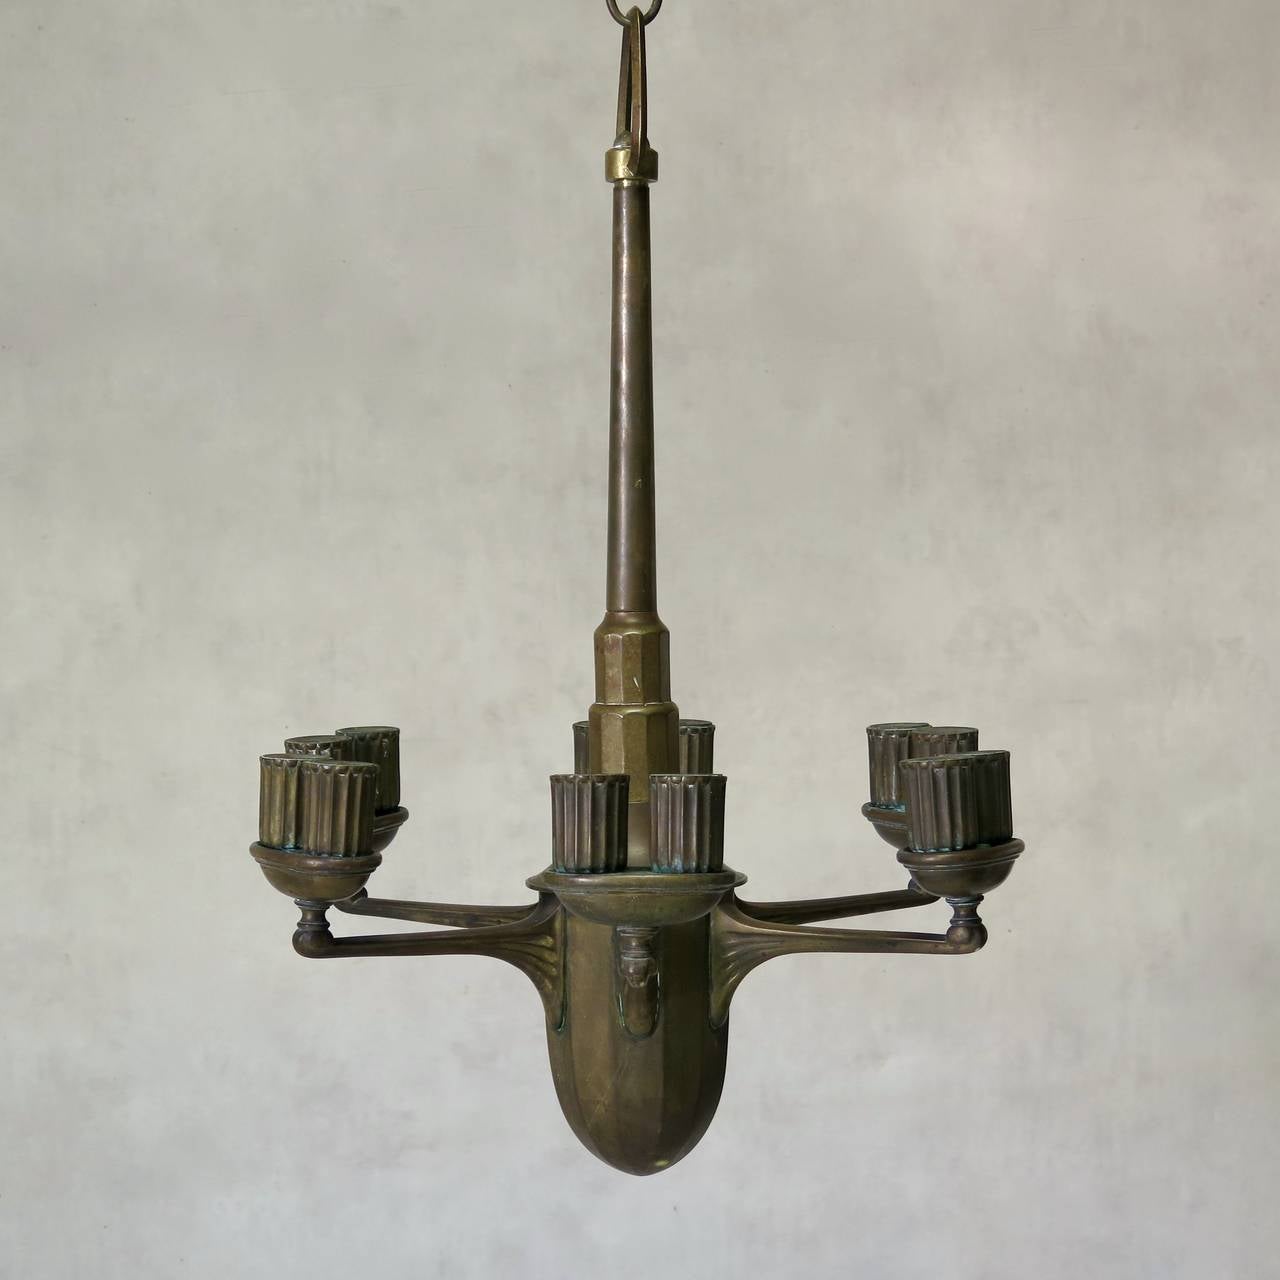 Elegant and heavy six-arm solid bronze chandelier with lovely lines, drawing on both Art Nouveau and Art Deco influences. Each arm supports an ovoid cup with two ridged light holders (the chandelier is meant for twelve lights). Stepped stem. Ovoid